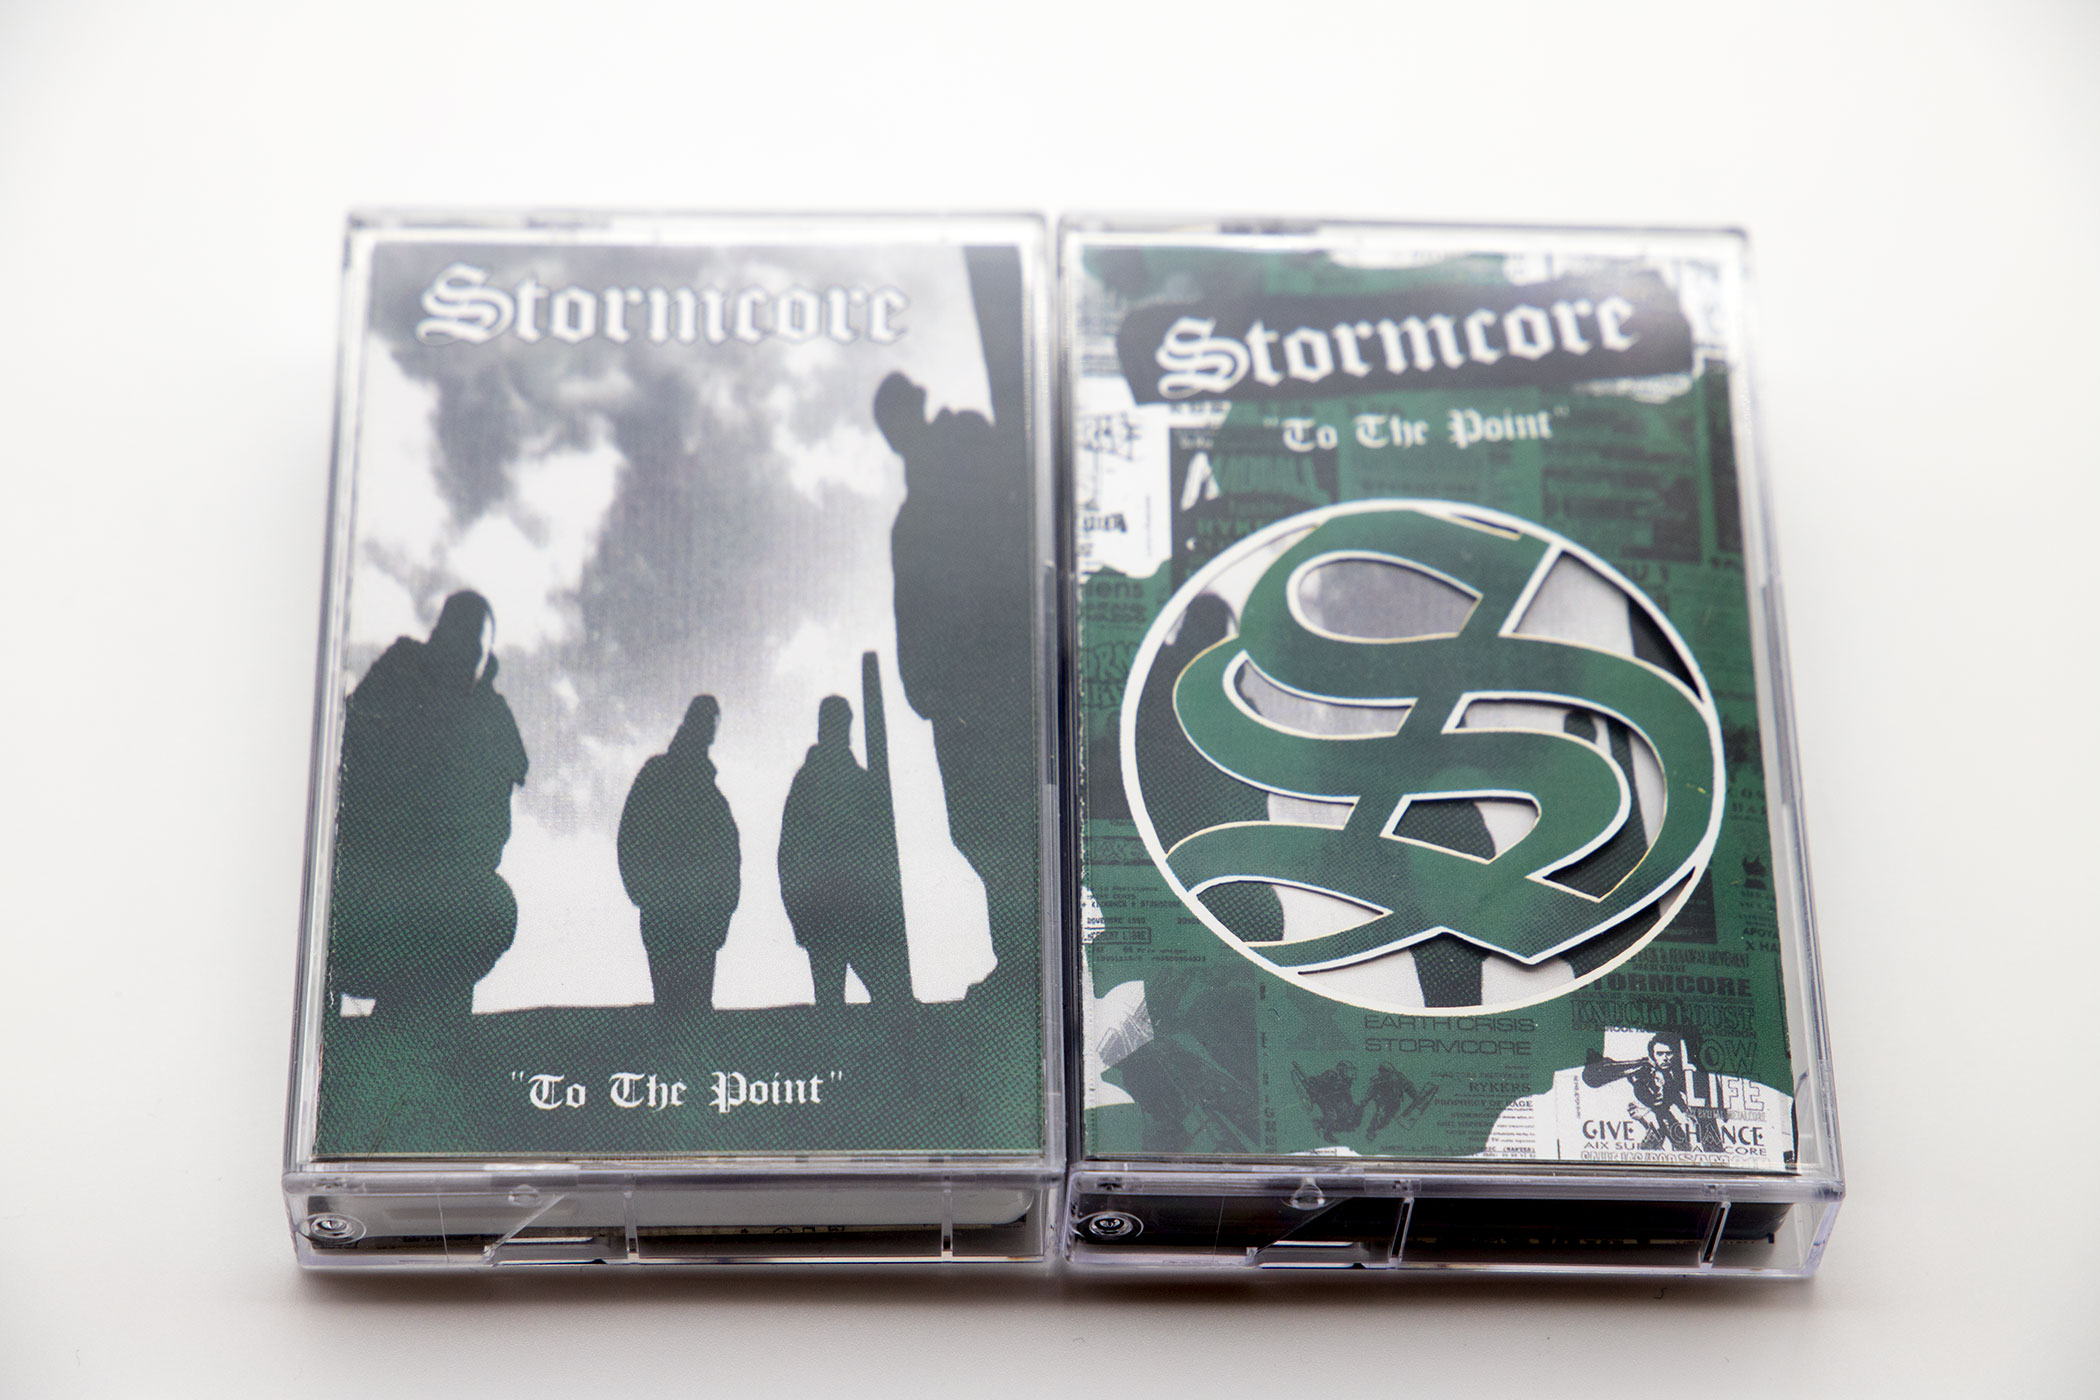 STORMCORE "To The Point" Cassette Audio Tape